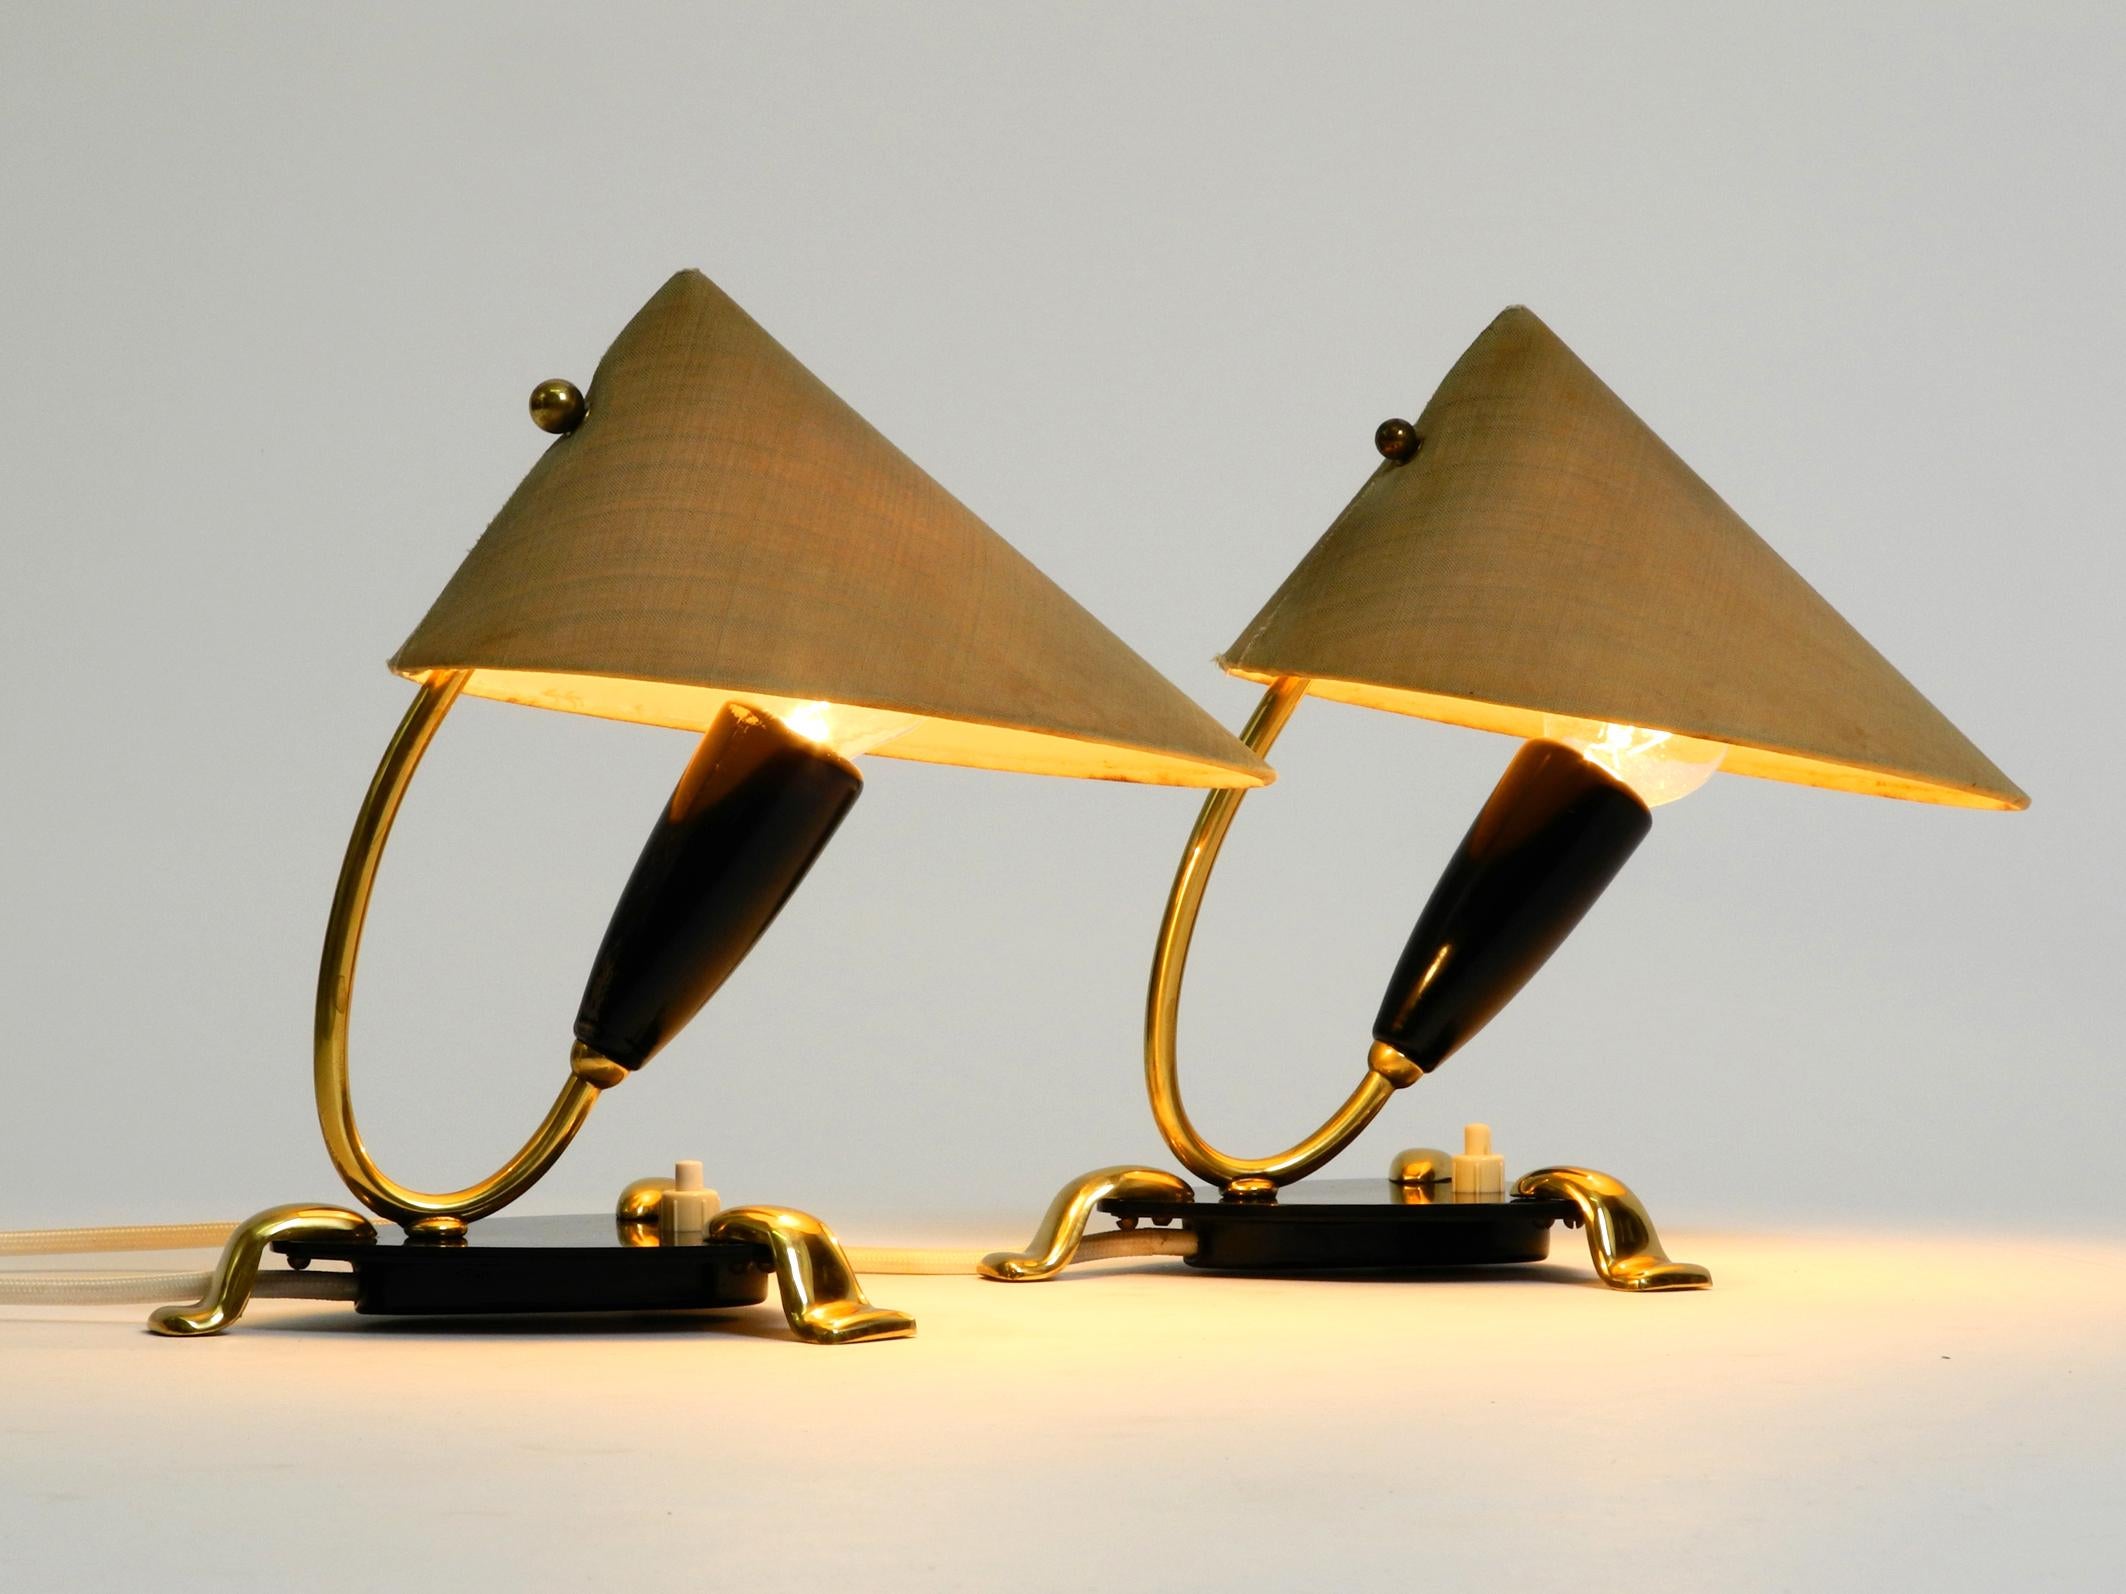 Mid-Century Modern Pair of Midcentury Bedside Lamps Made of Brass and Plexiglass with Fabric Shades